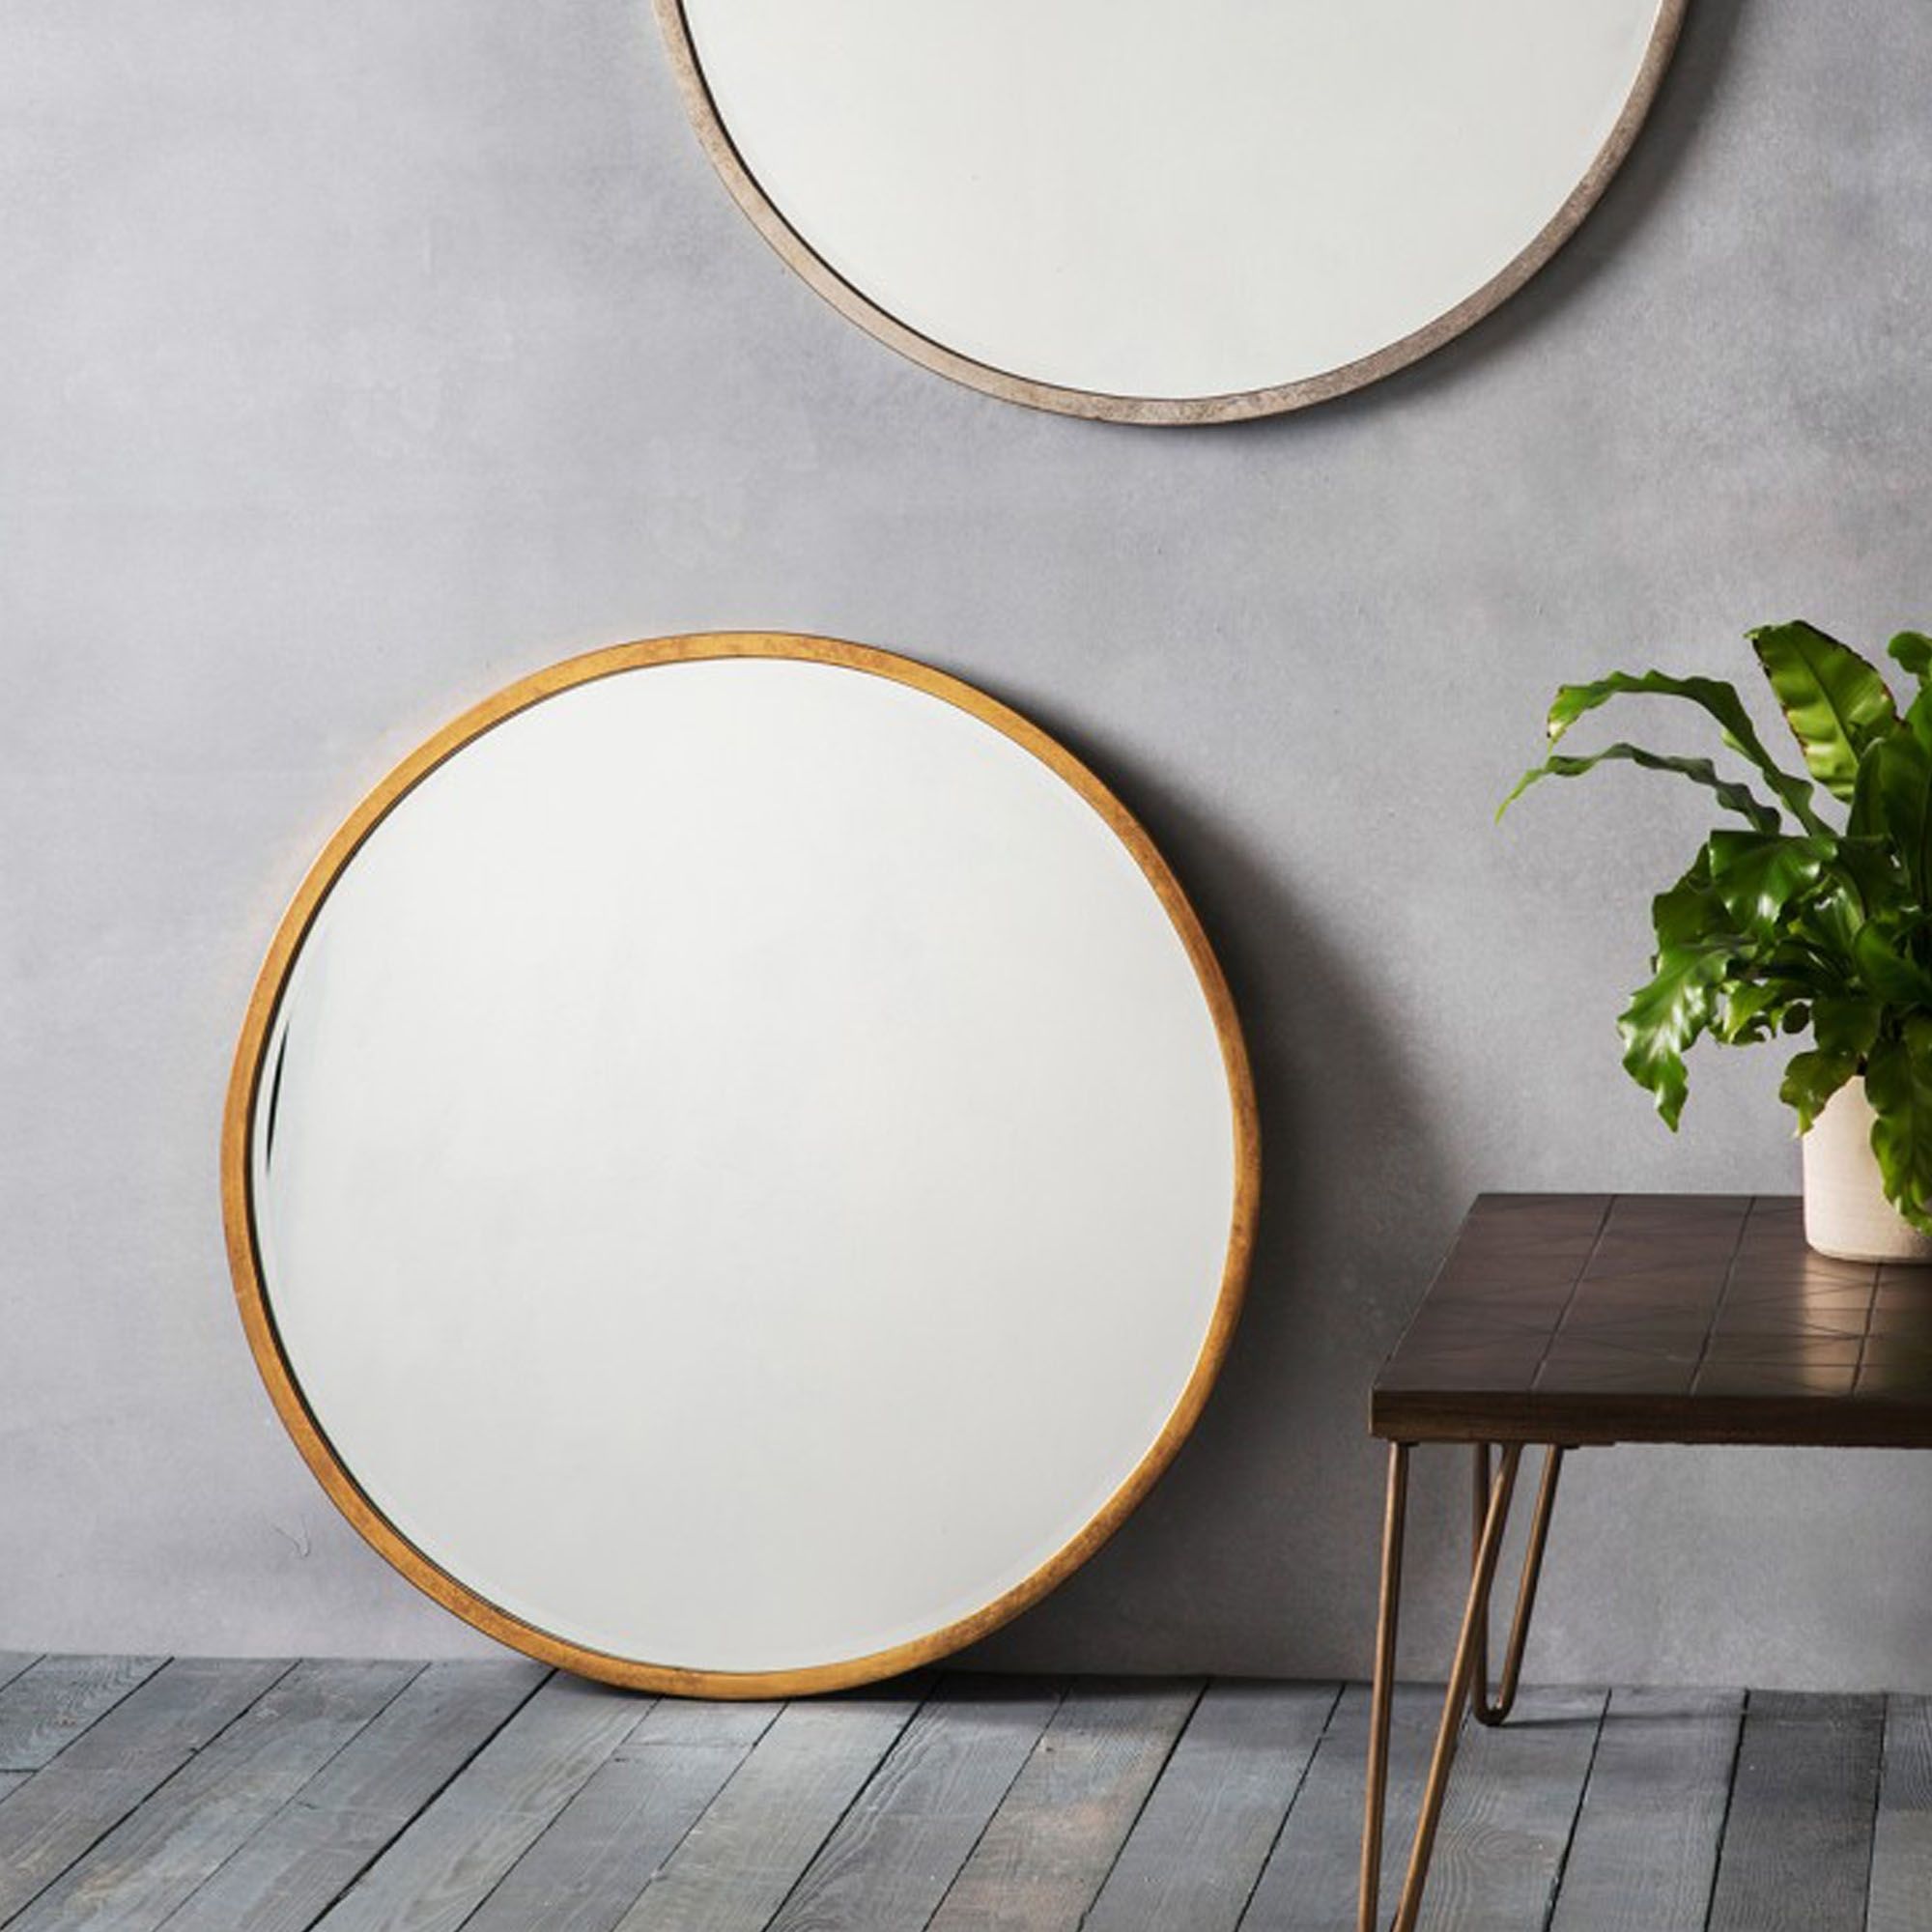 Higgins Antique Gold Round Wall Mirror | Wall Mirrors | Homesdirect365 Inside Shiny Black Round Wall Mirrors (View 2 of 15)